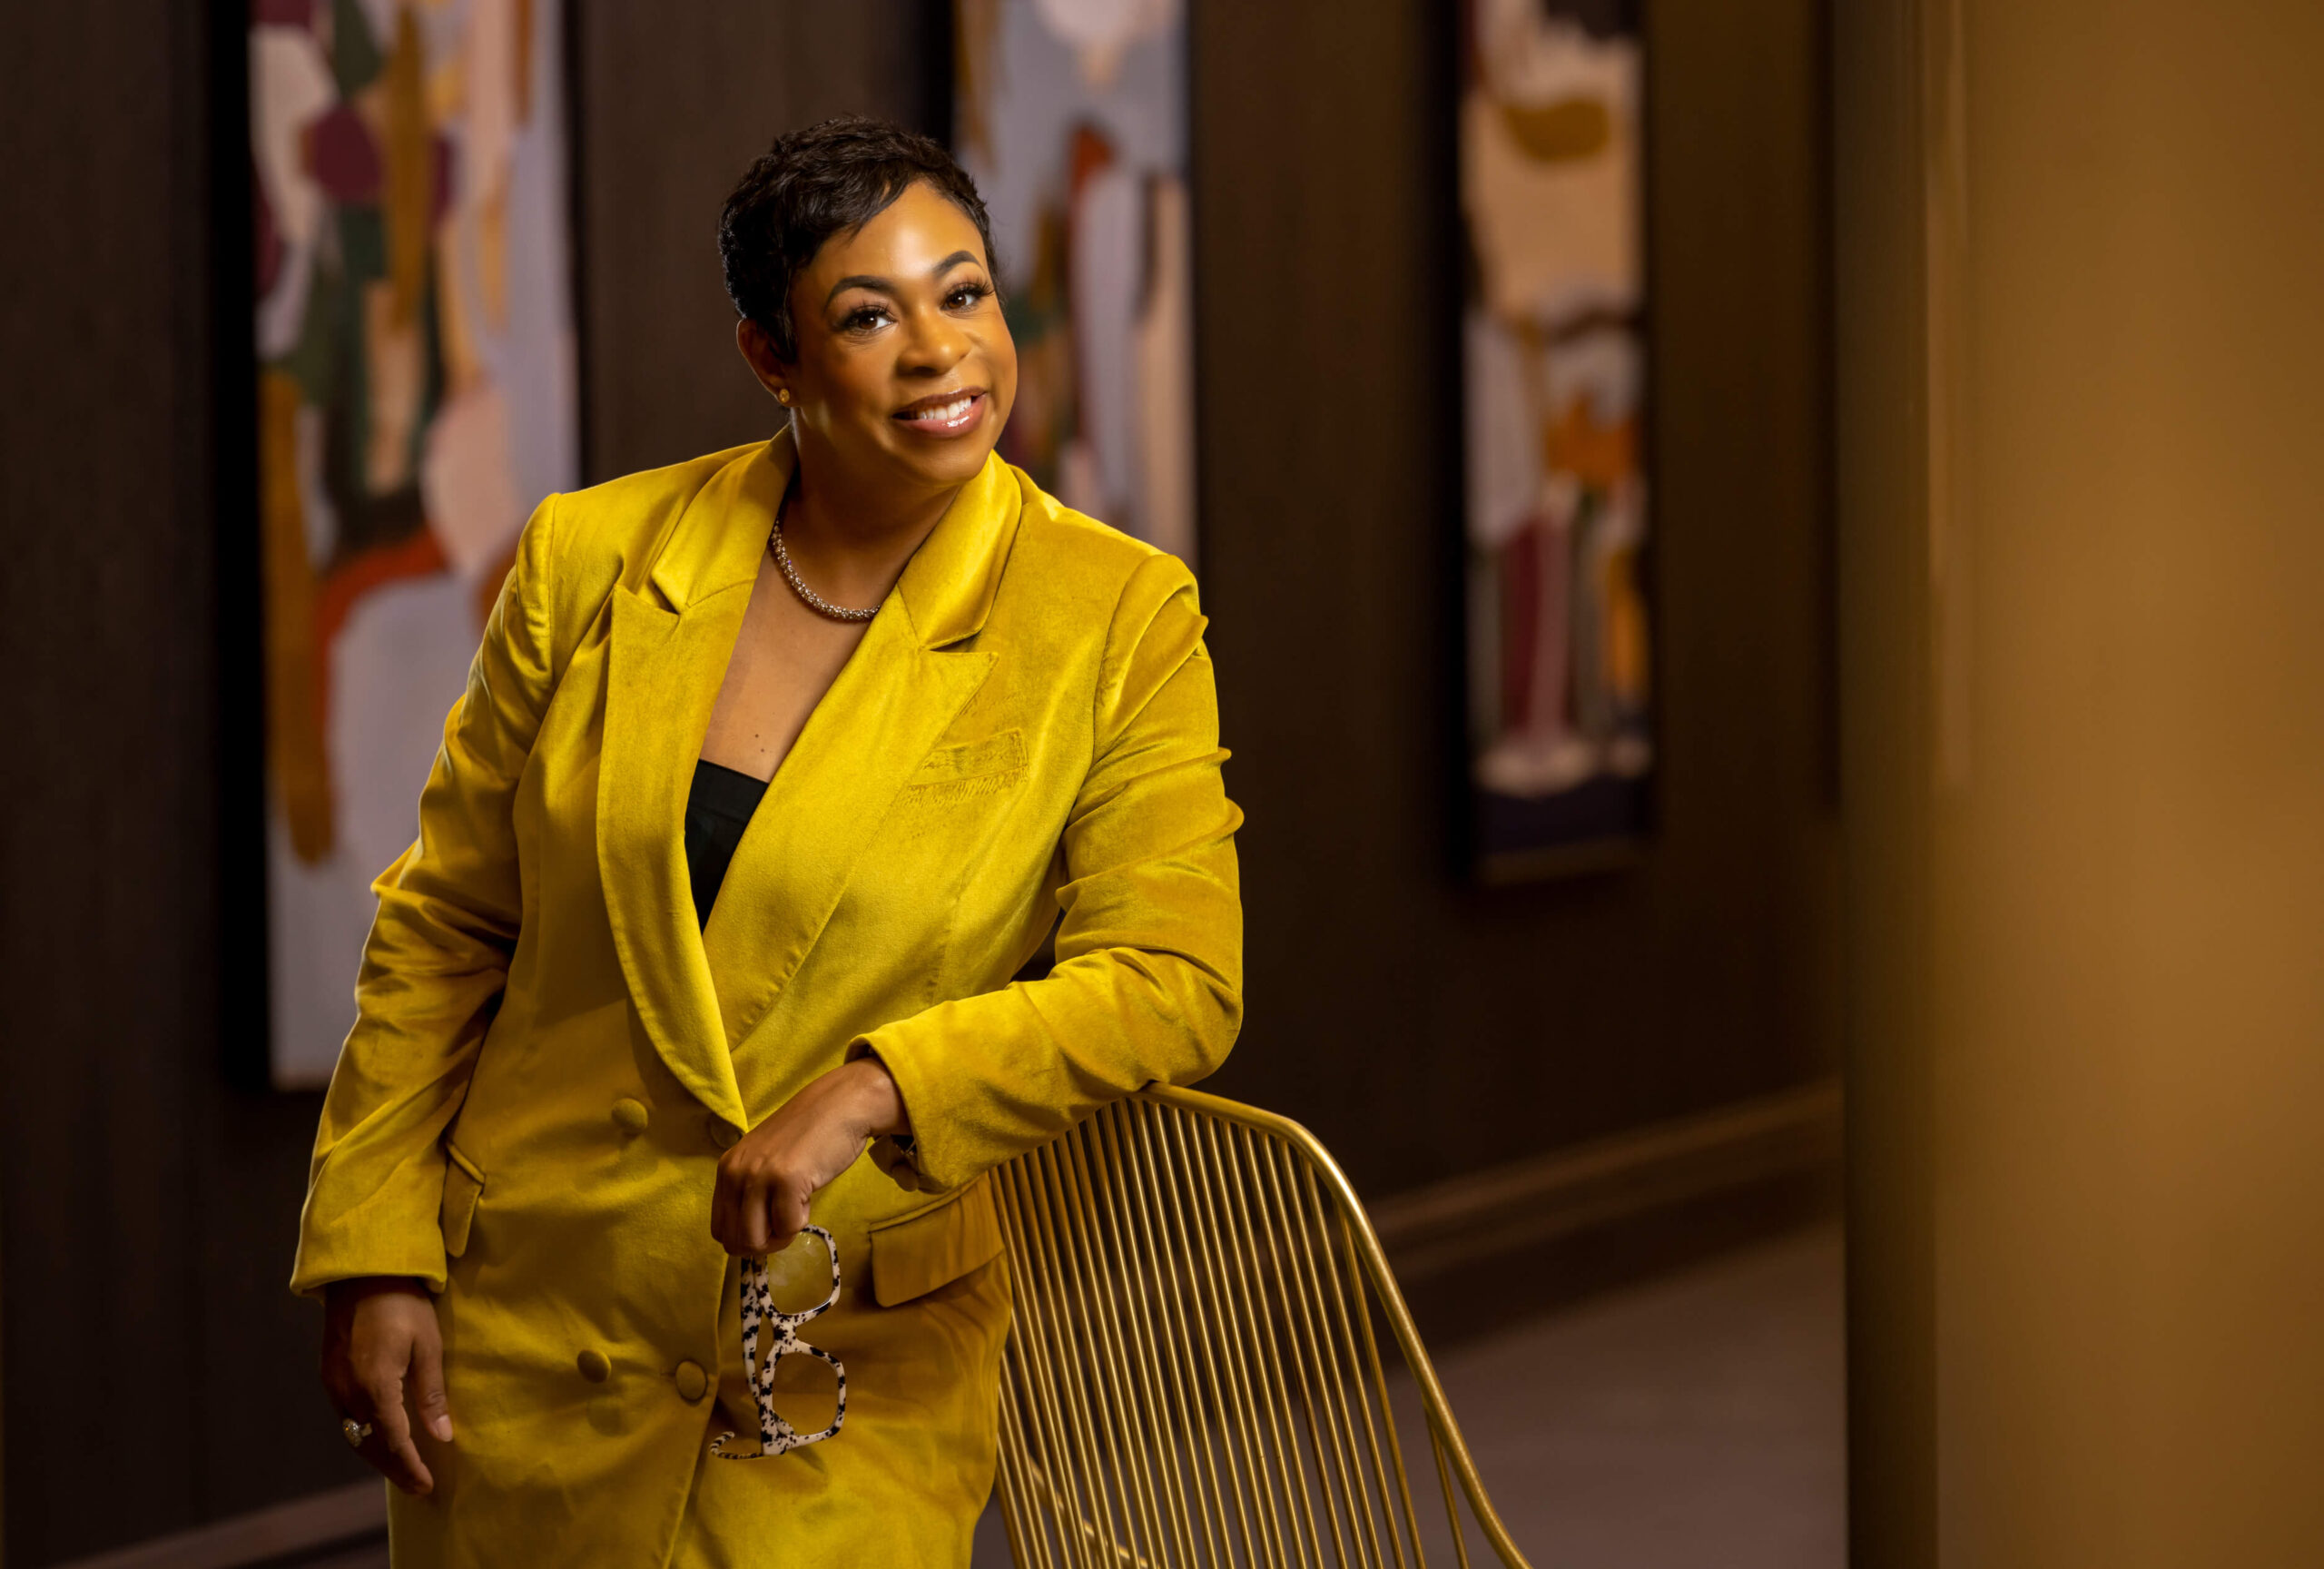 cool woman leaning on a chair while wearing a yellow suit and holding glasses